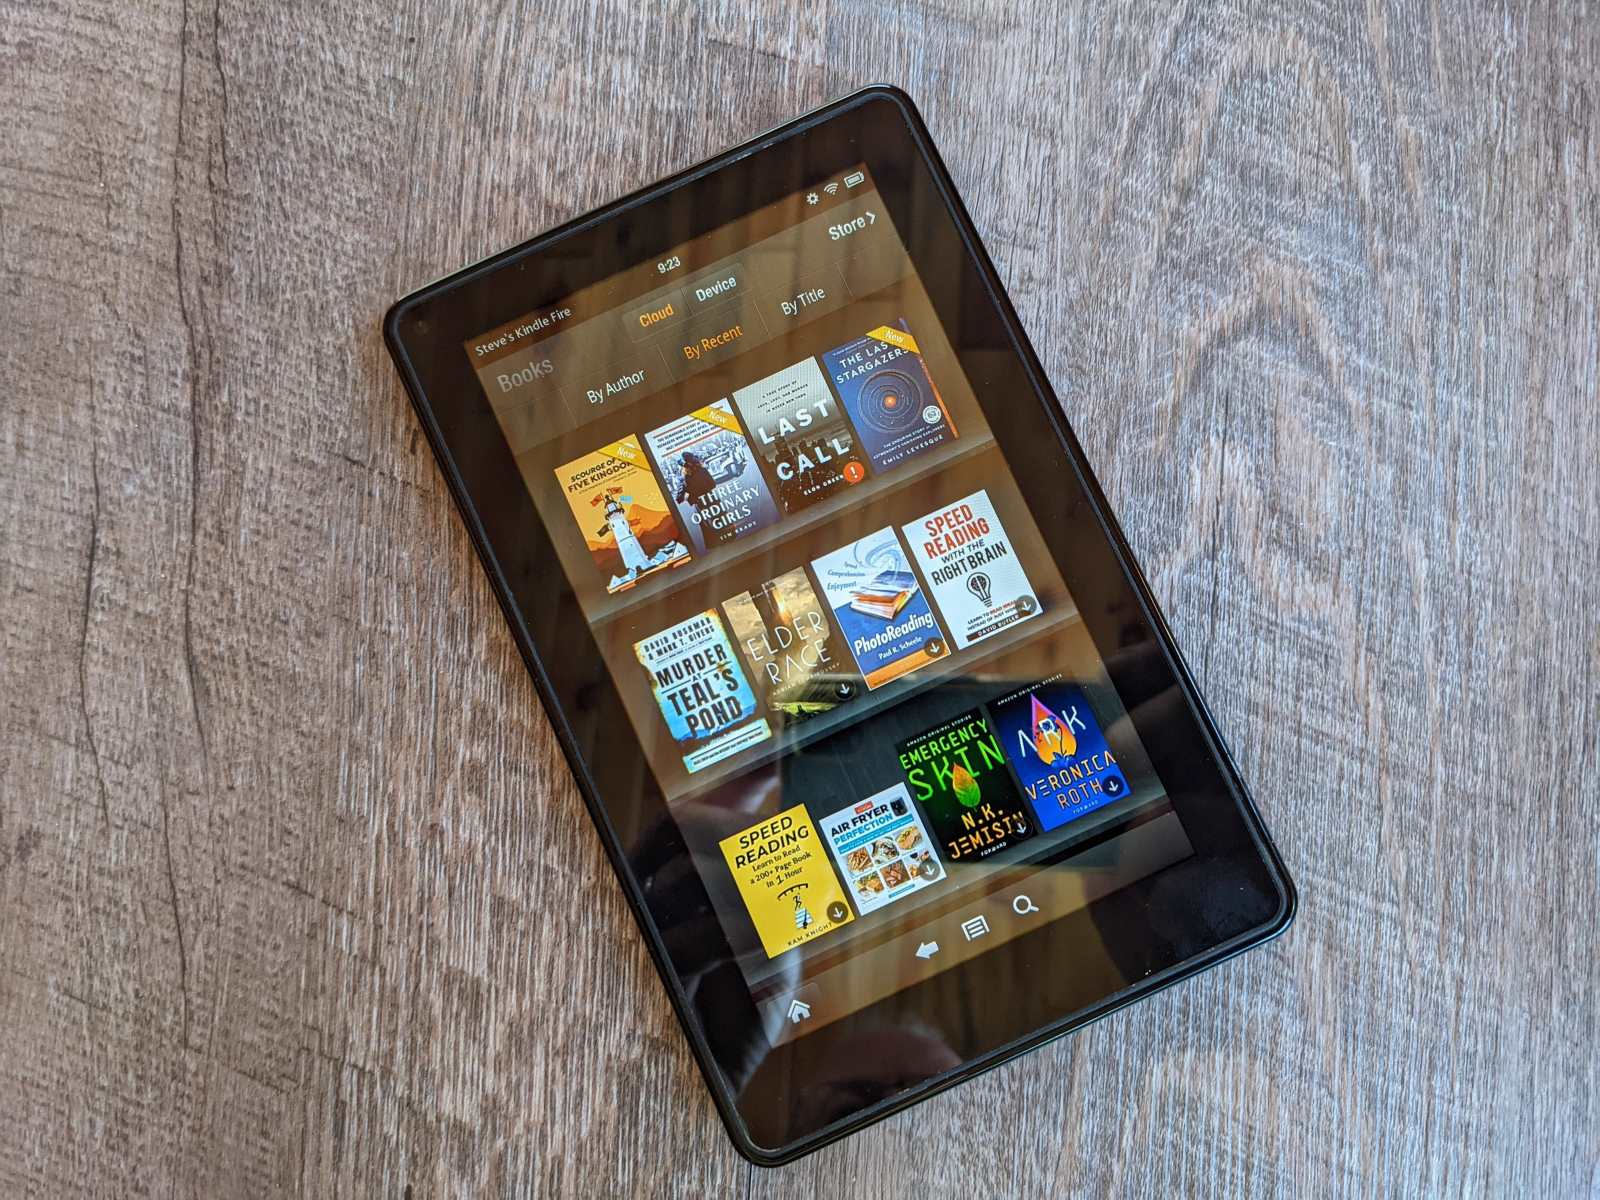 What Can Kindle Fire Do